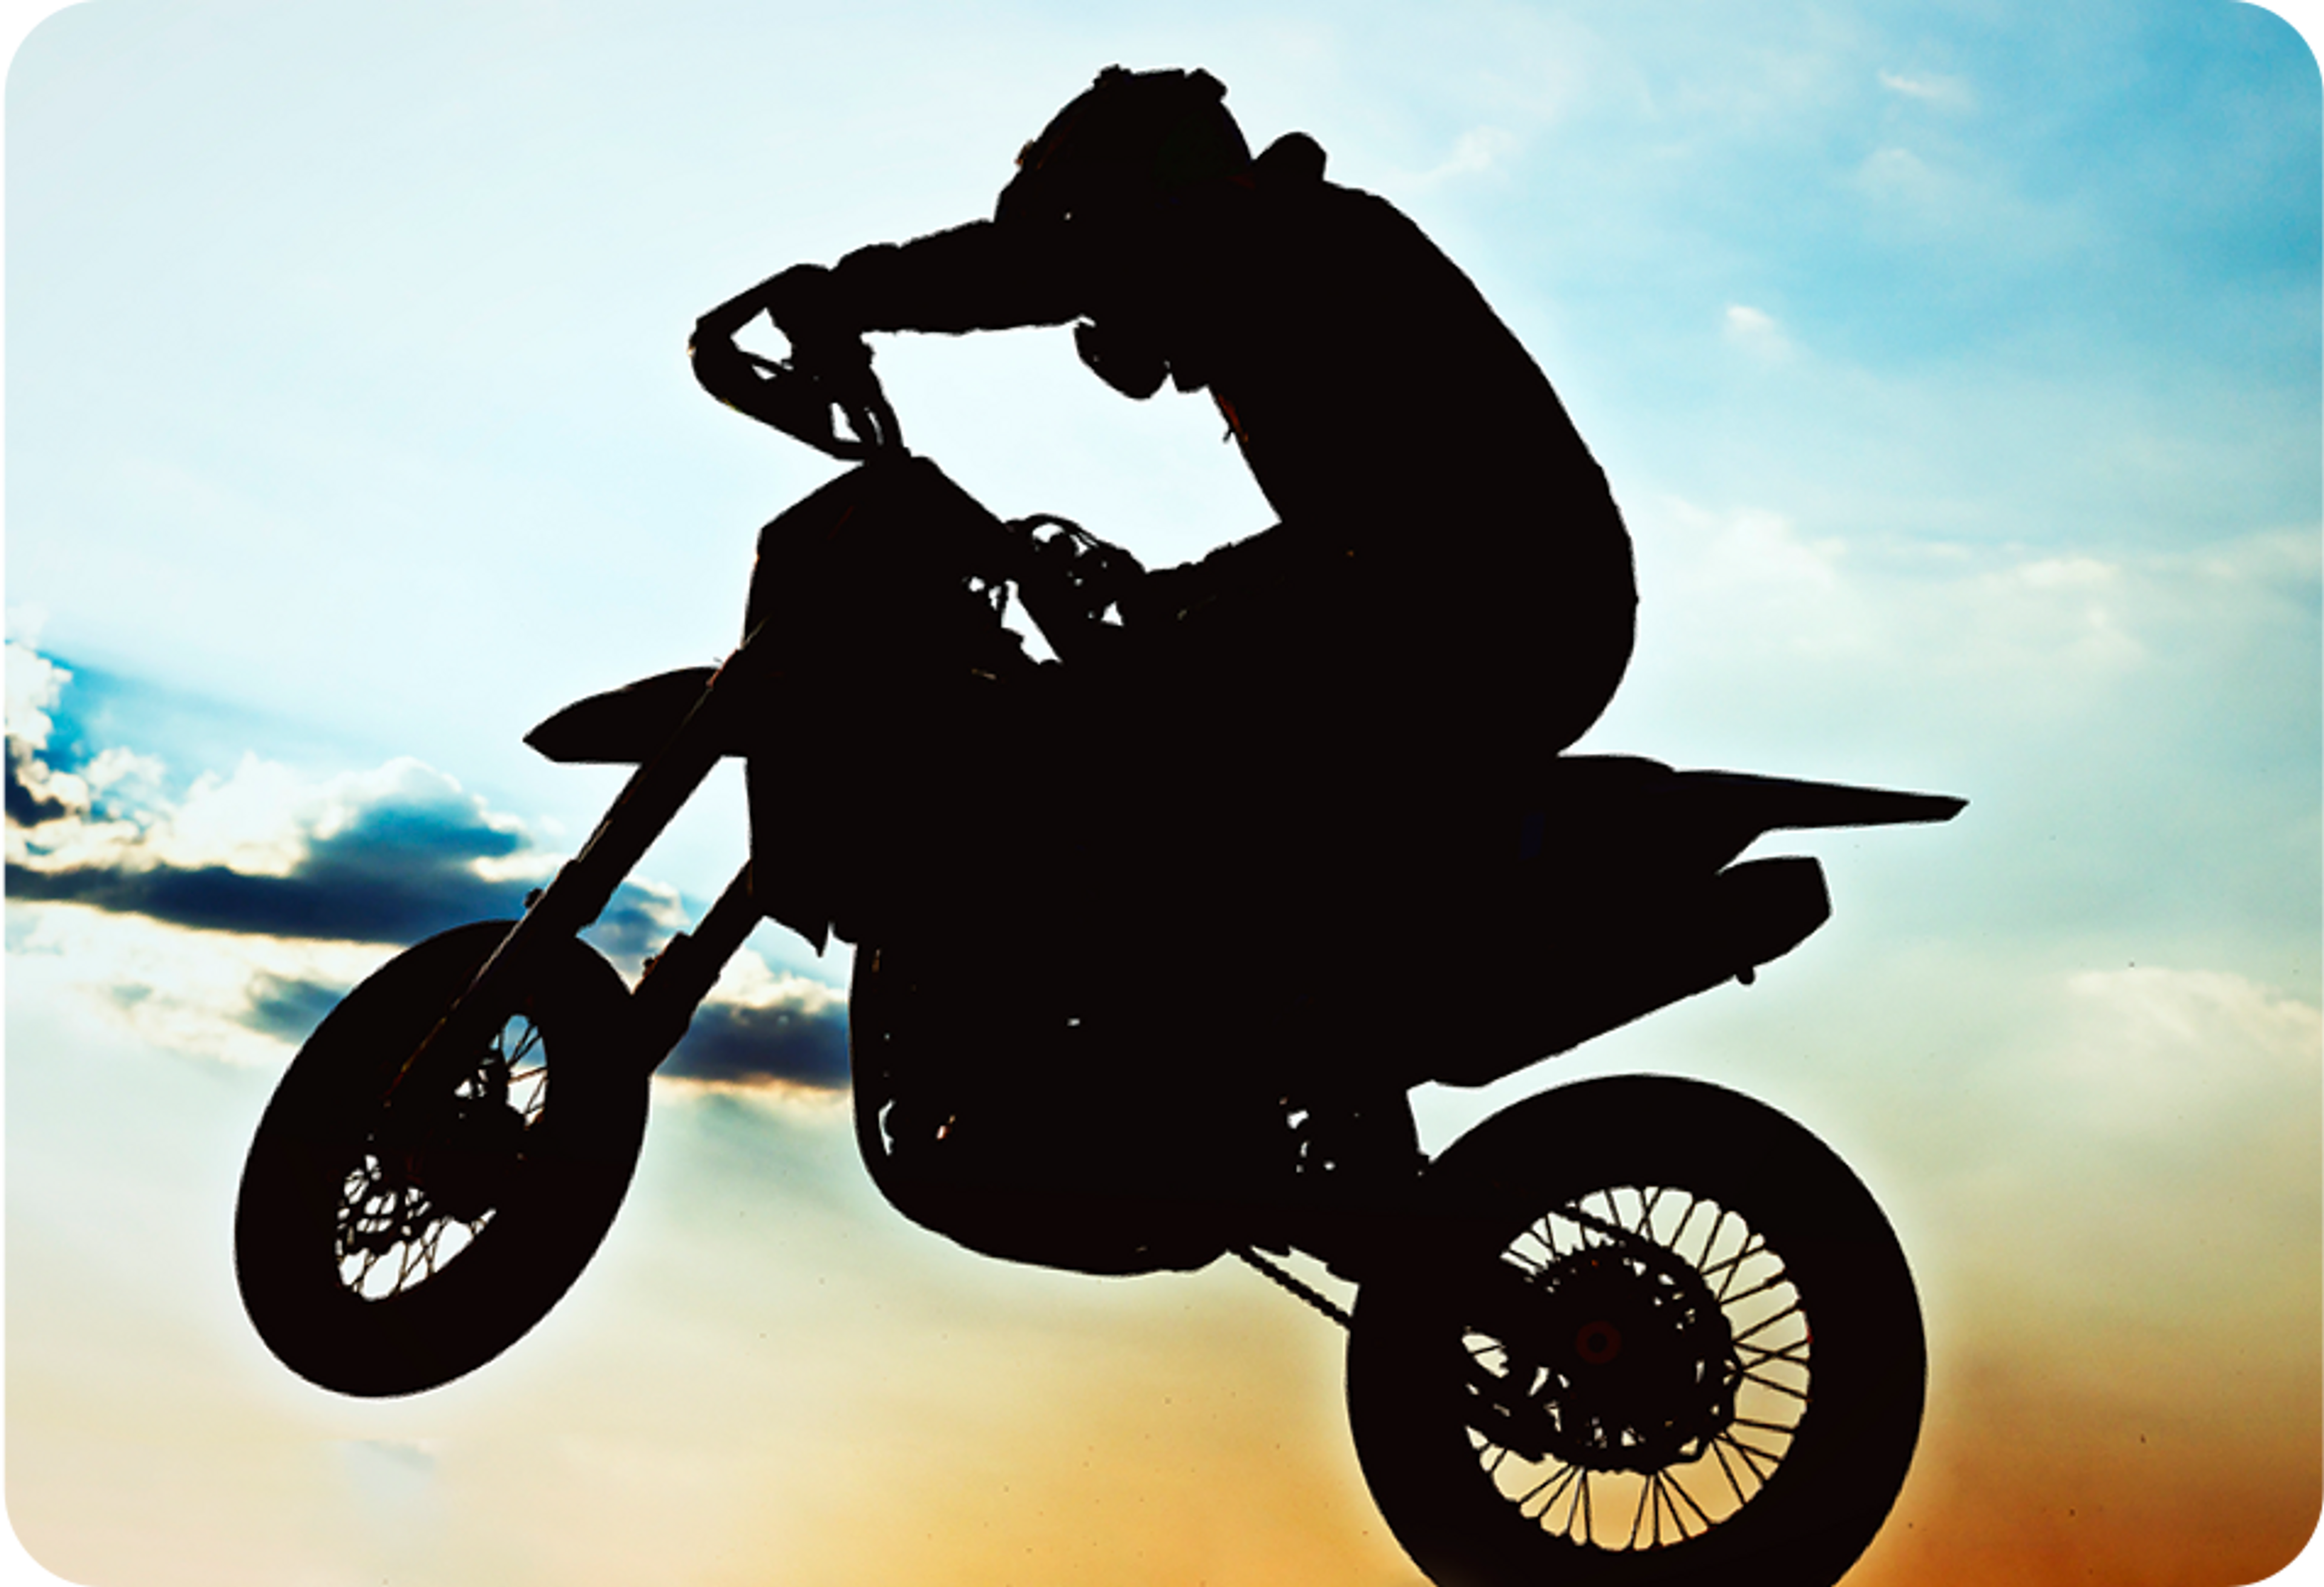 Picture of man riding a dirt bike in the air with " Motorcycle & Powersports" written in the middle of this image in red sentence case letter on a white rectangular background